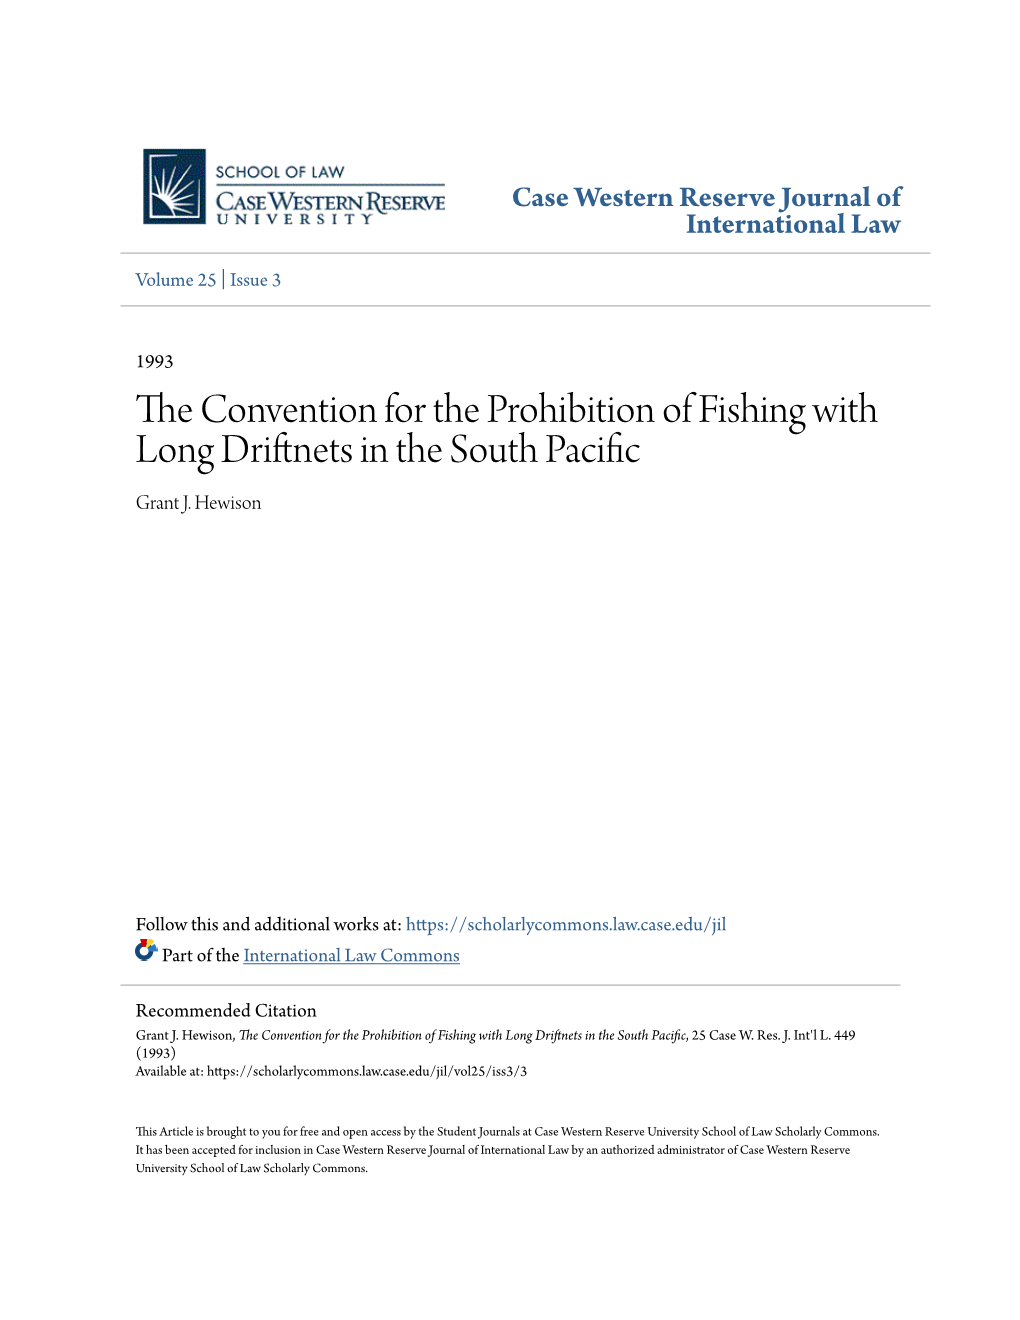 The Convention for the Prohibition of Fishing with Long Driftnets in the South Pacific, 25 Case W